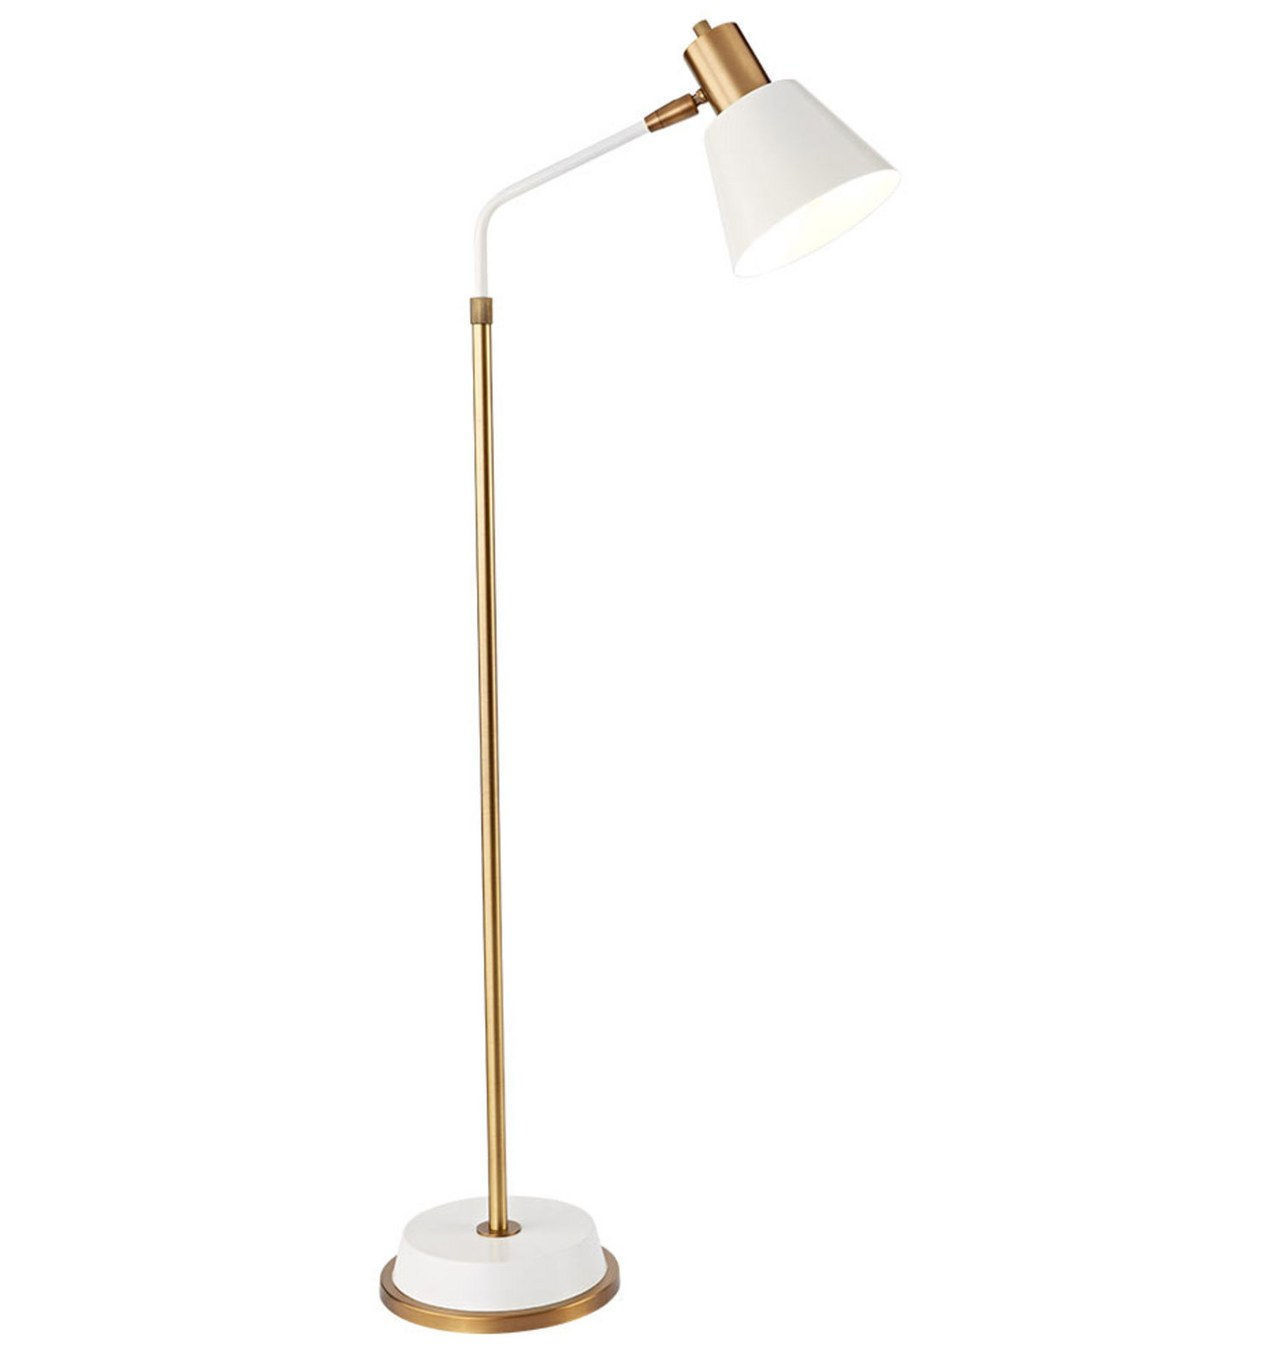 03 ceiling lights table lamps floor lamp 0222 courtesy vendor